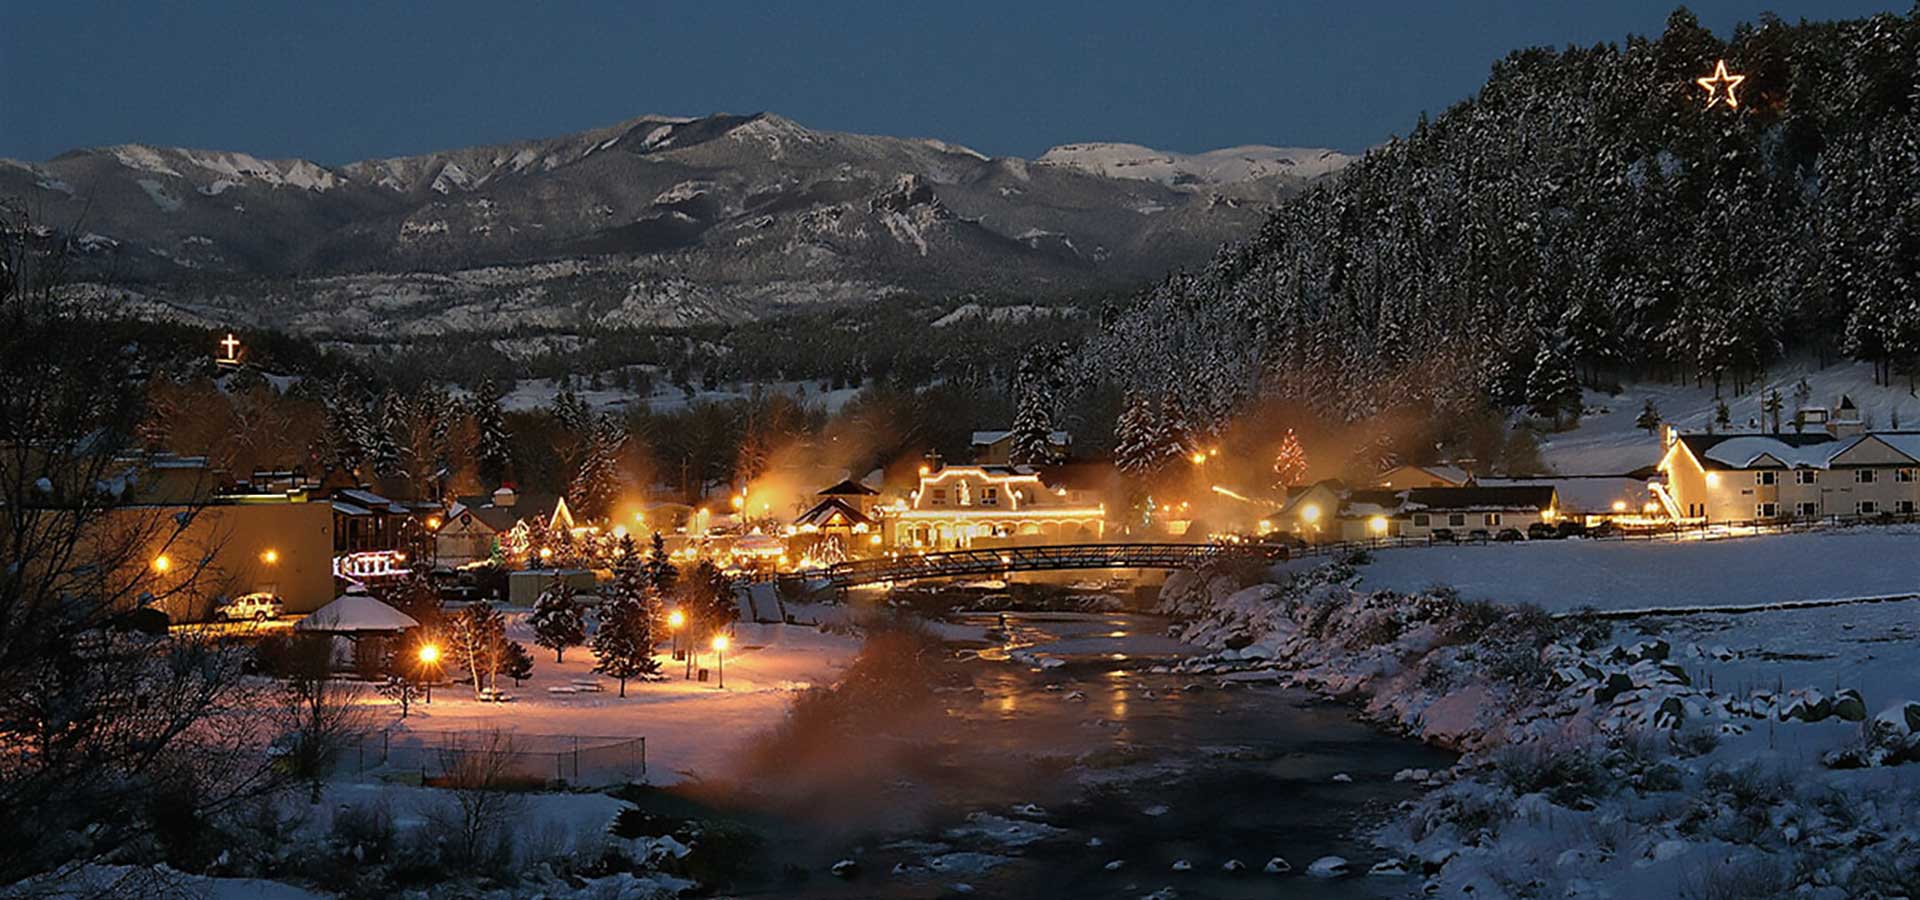 Pagosa Springs in the winter time